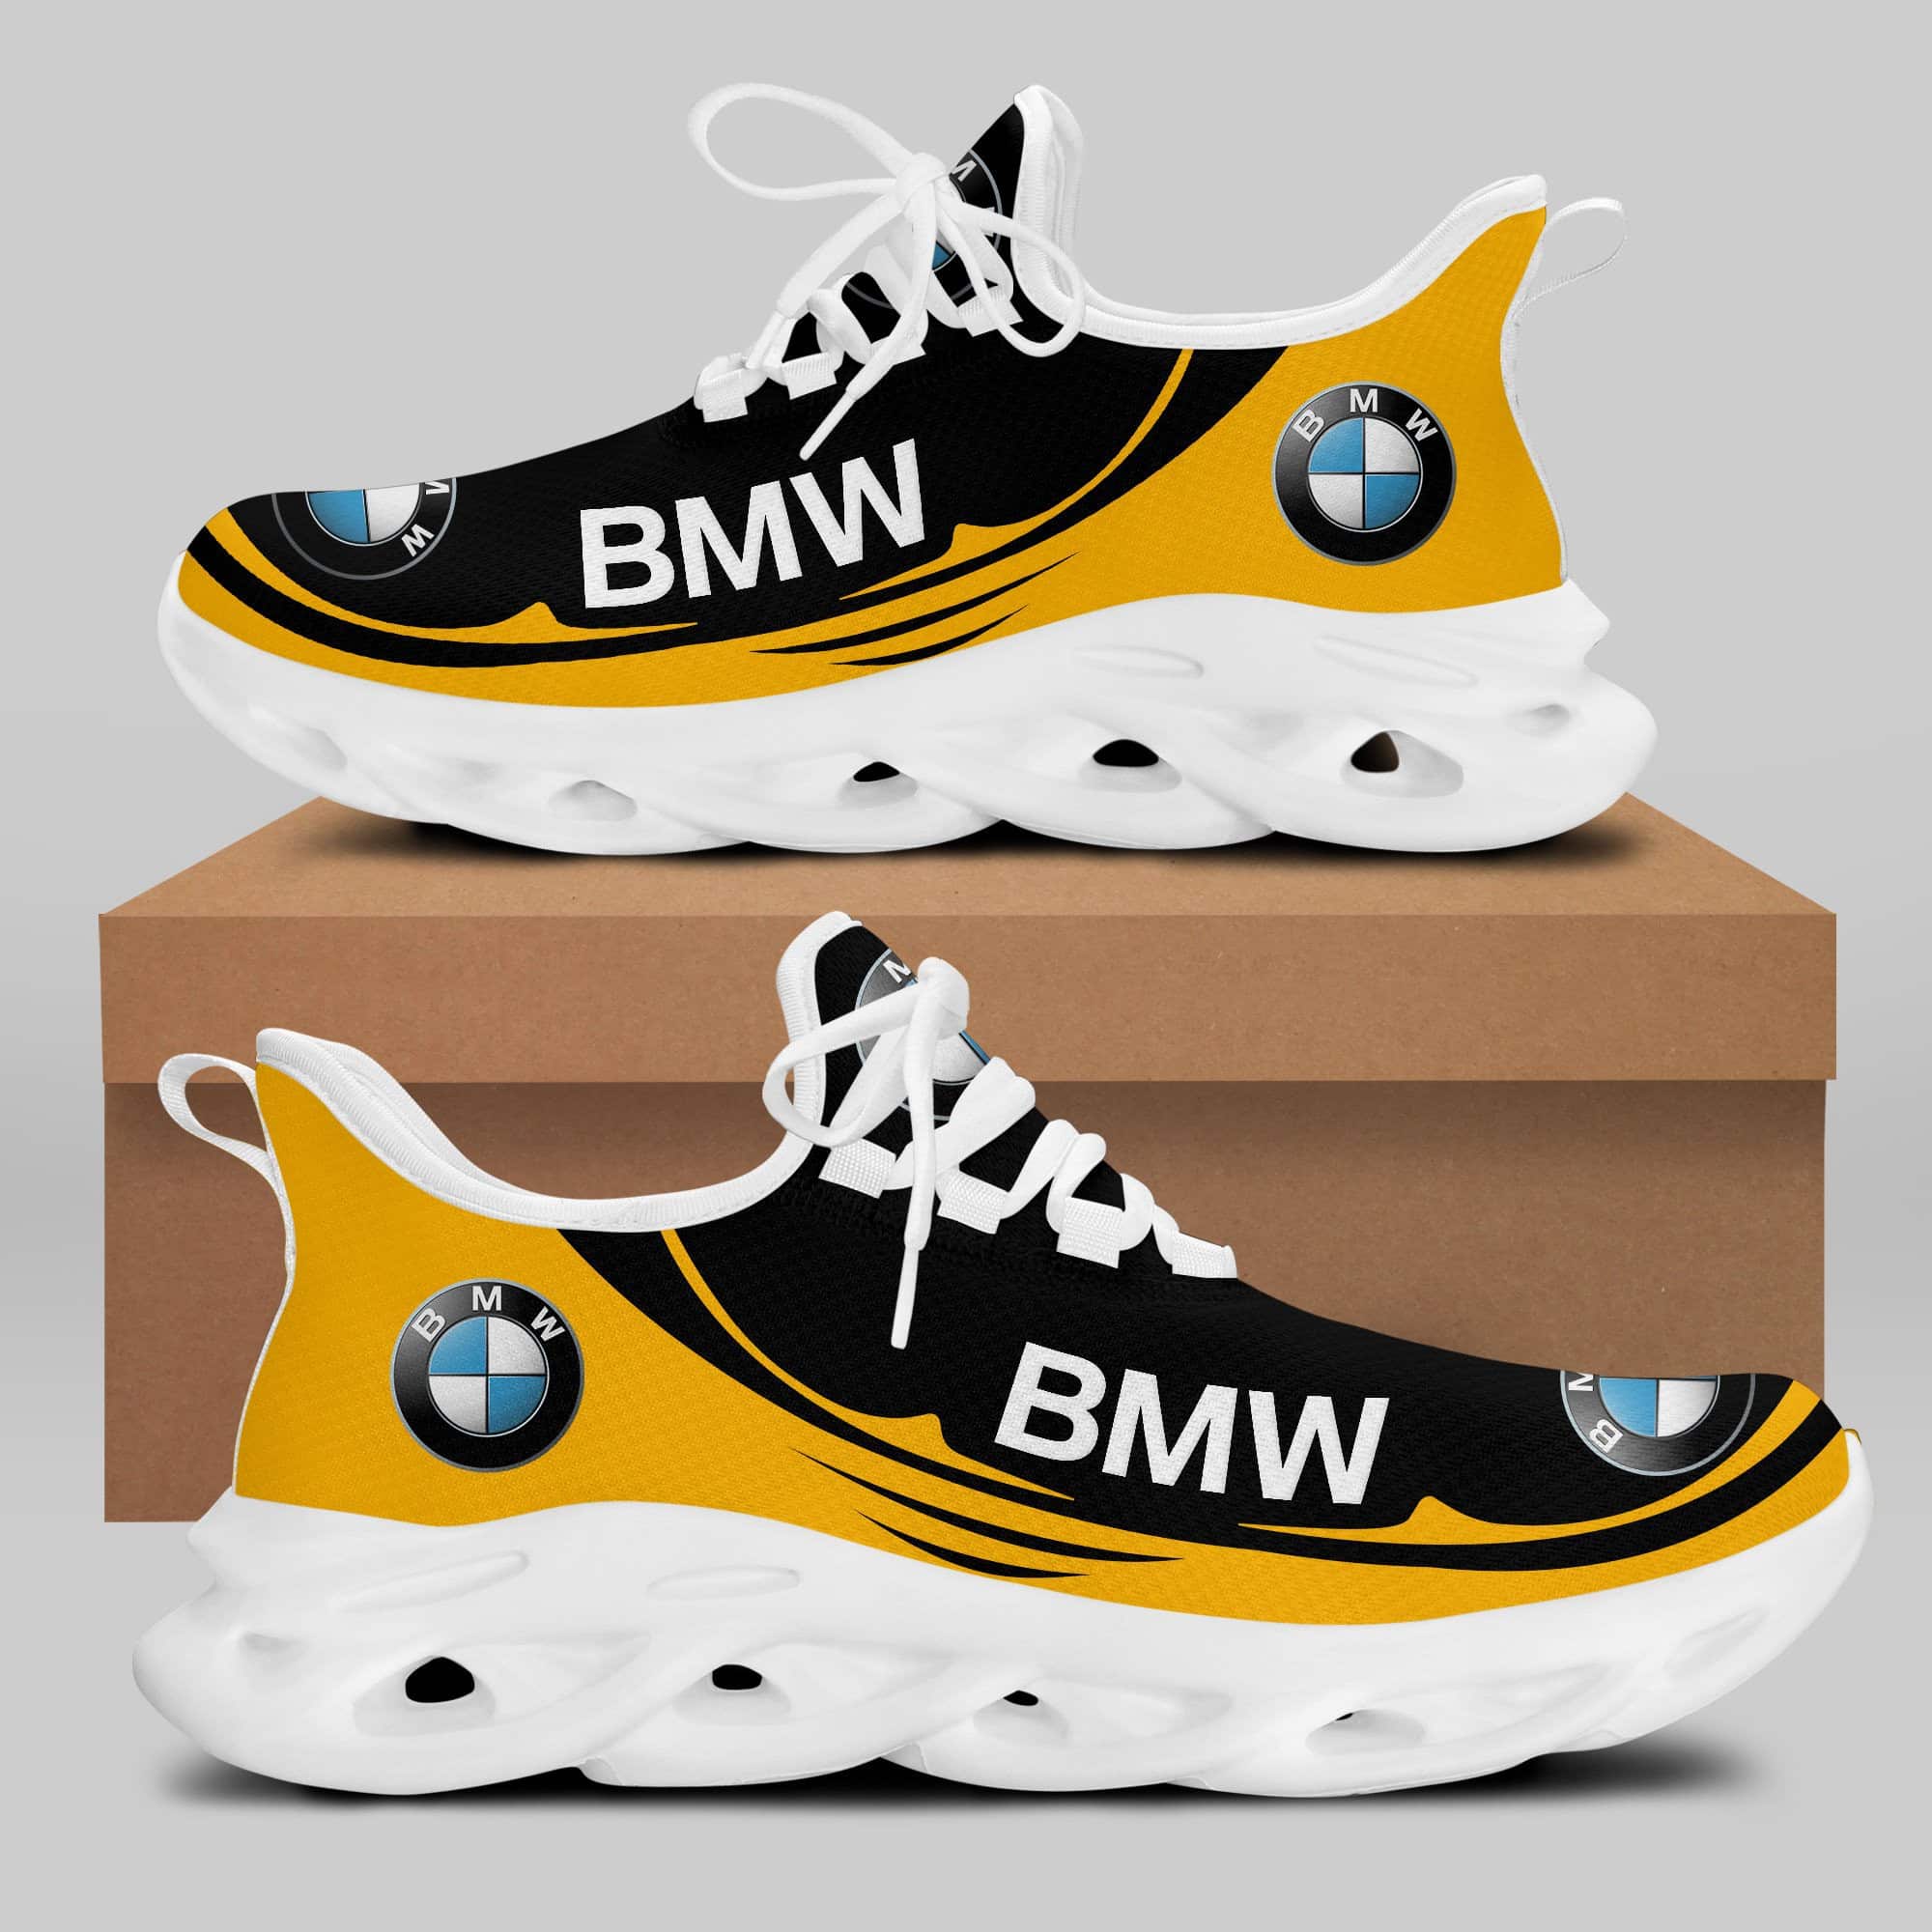 Bmw Running Shoes Max Soul Shoes Sneakers Ver 27 2